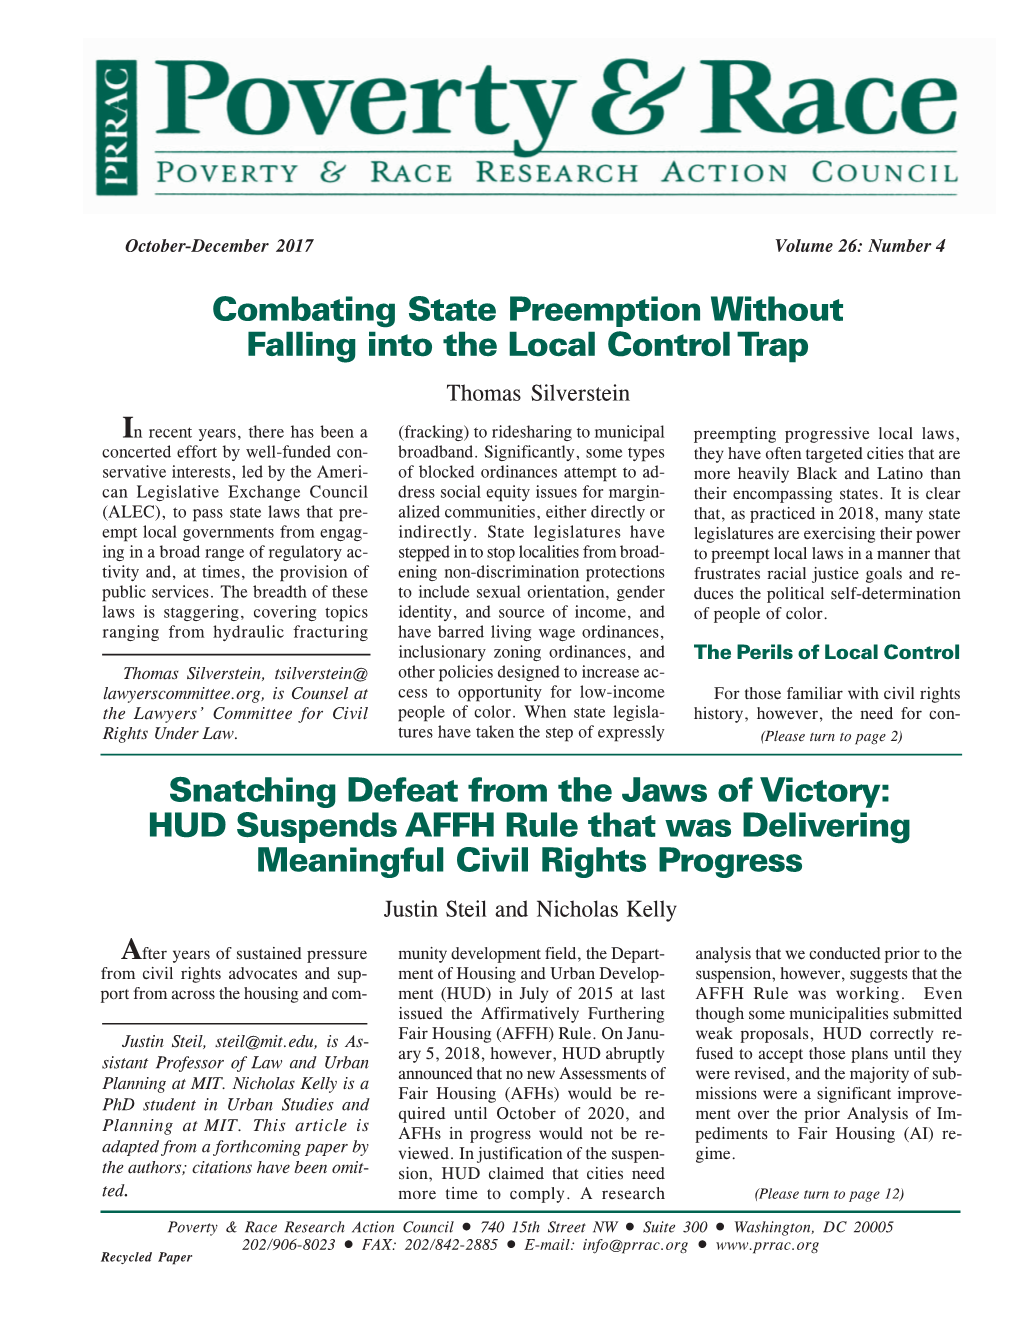 Combating State Preemption Without Falling Into the Local Control Trap Thomas Silverstein